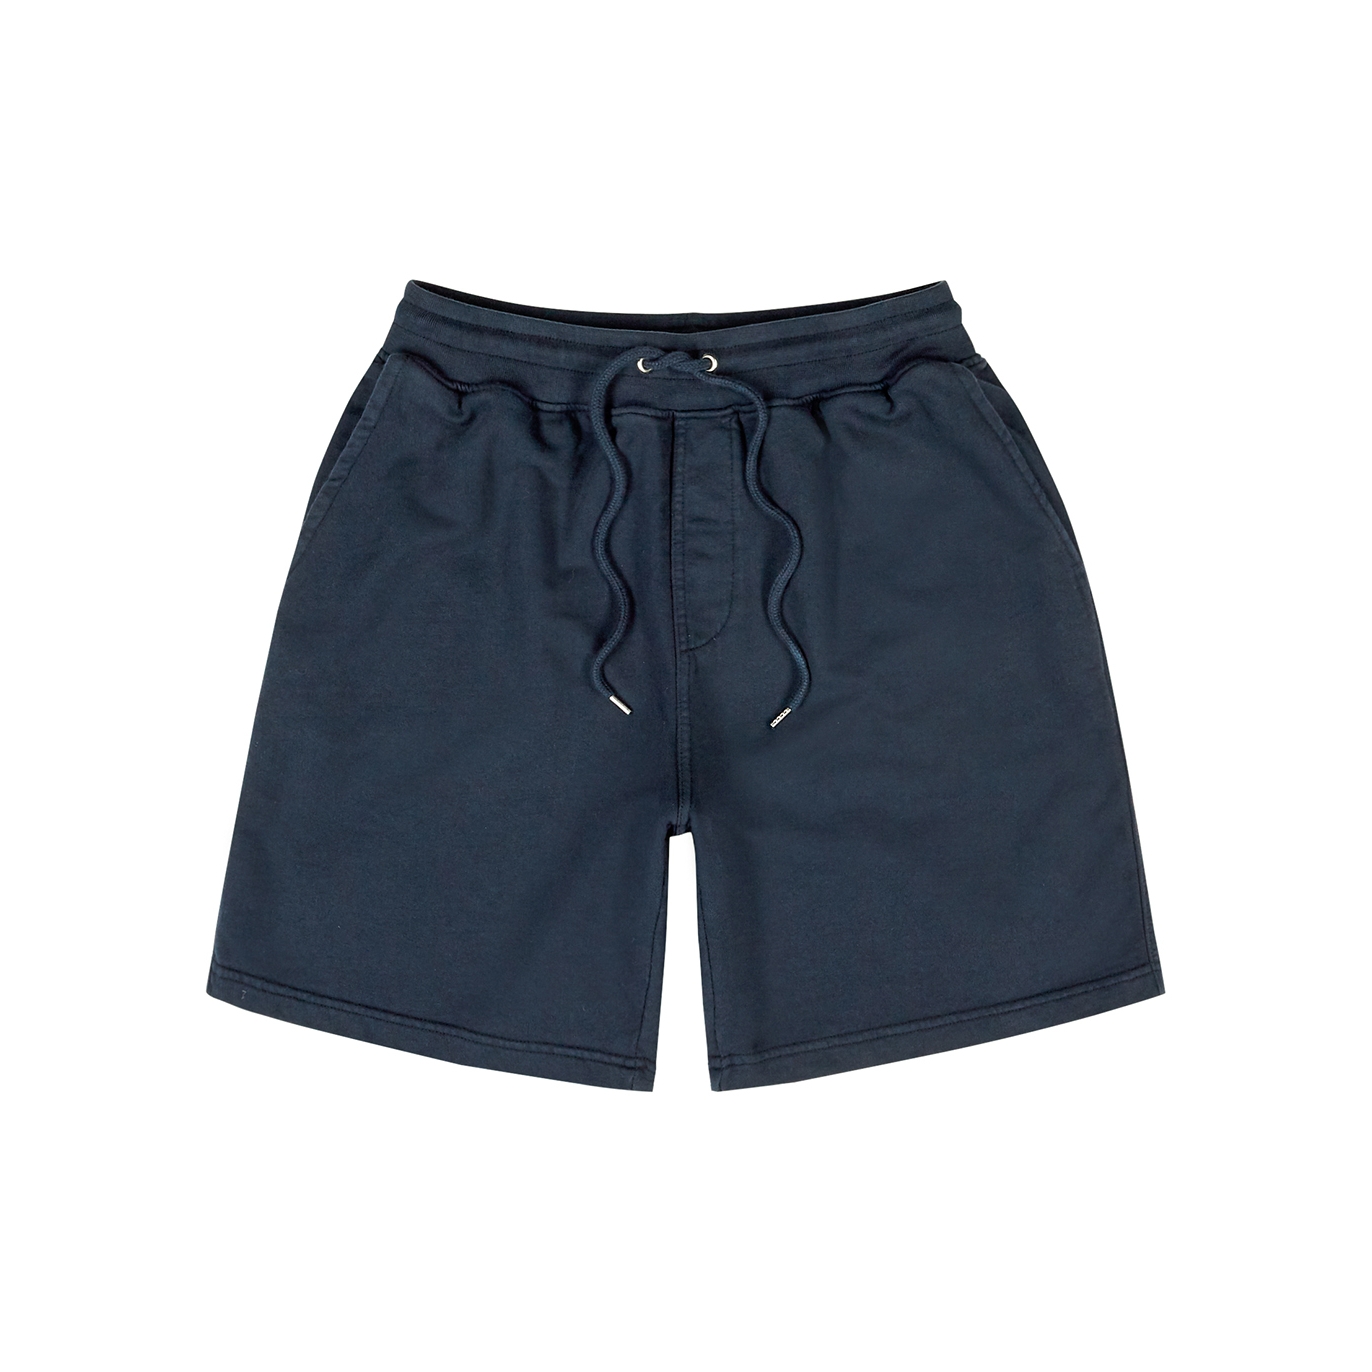 Colorful Standard Cotton Shorts In Navy